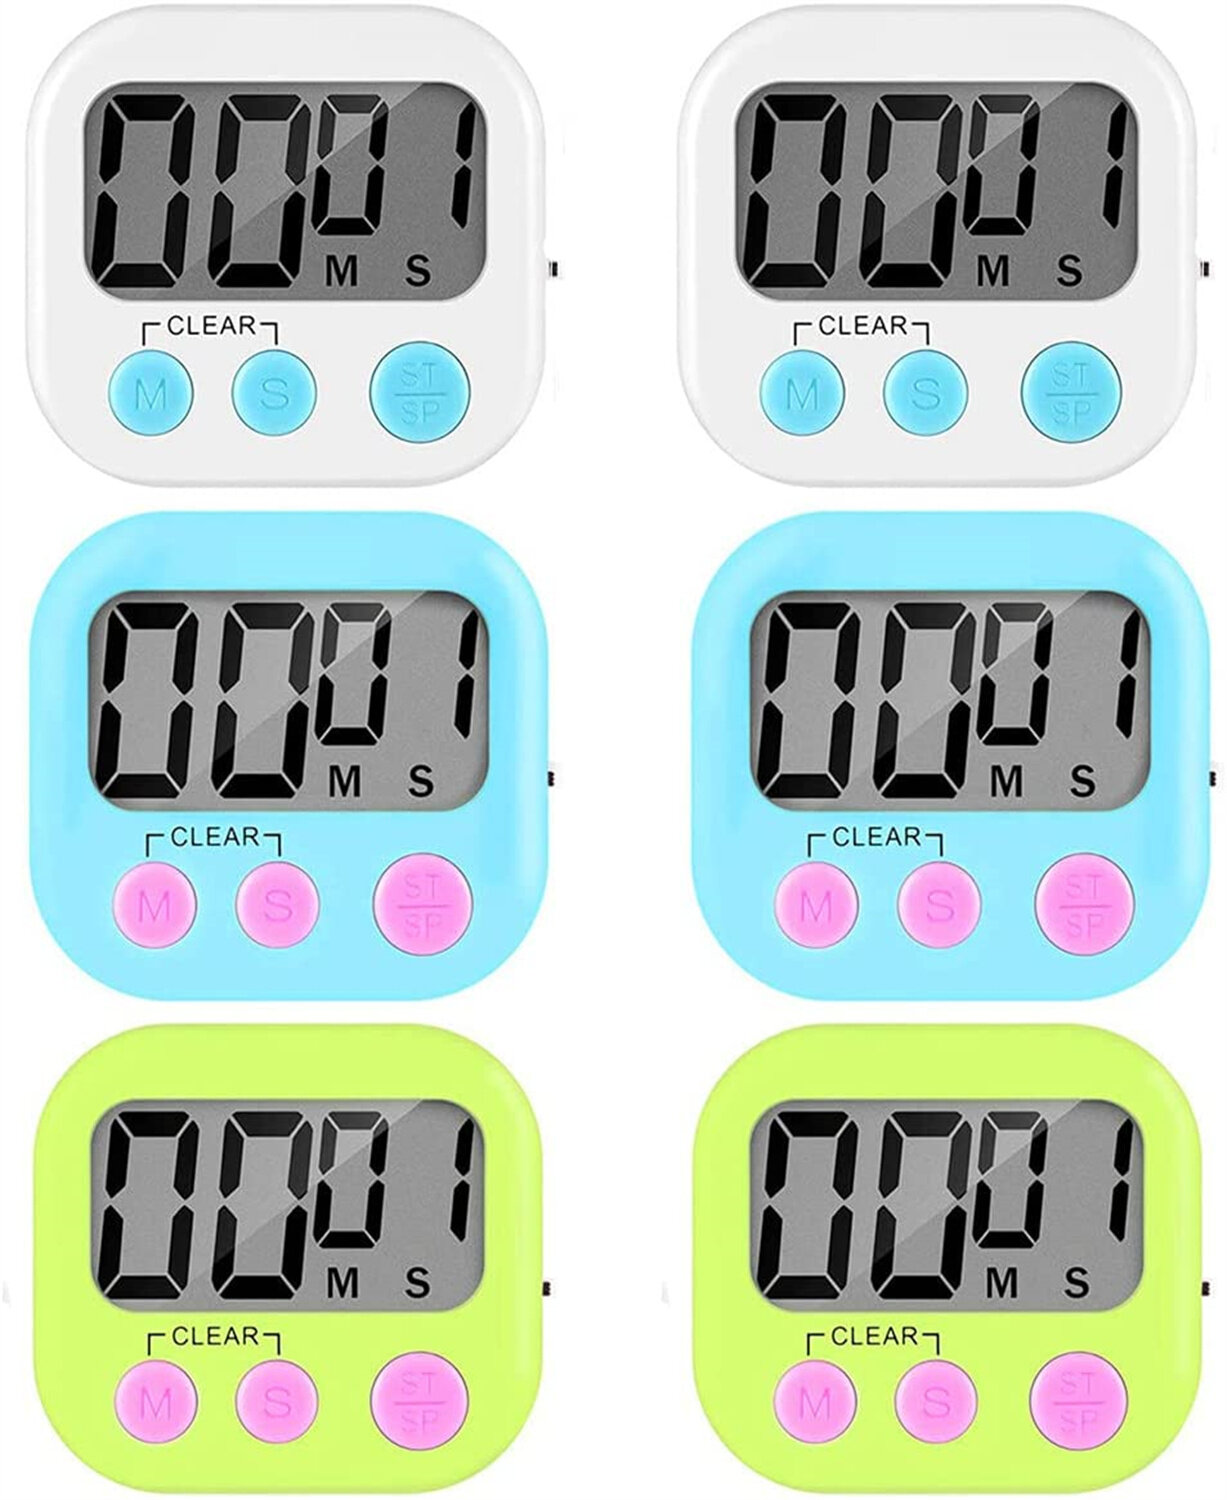 Digital Kitchen Timers Visual timers Large LED Display Magnetic Countdown Countup Timer for Classroom Cooking Fitness Baking Studying Teaching Easy for Kids and Seniors Black